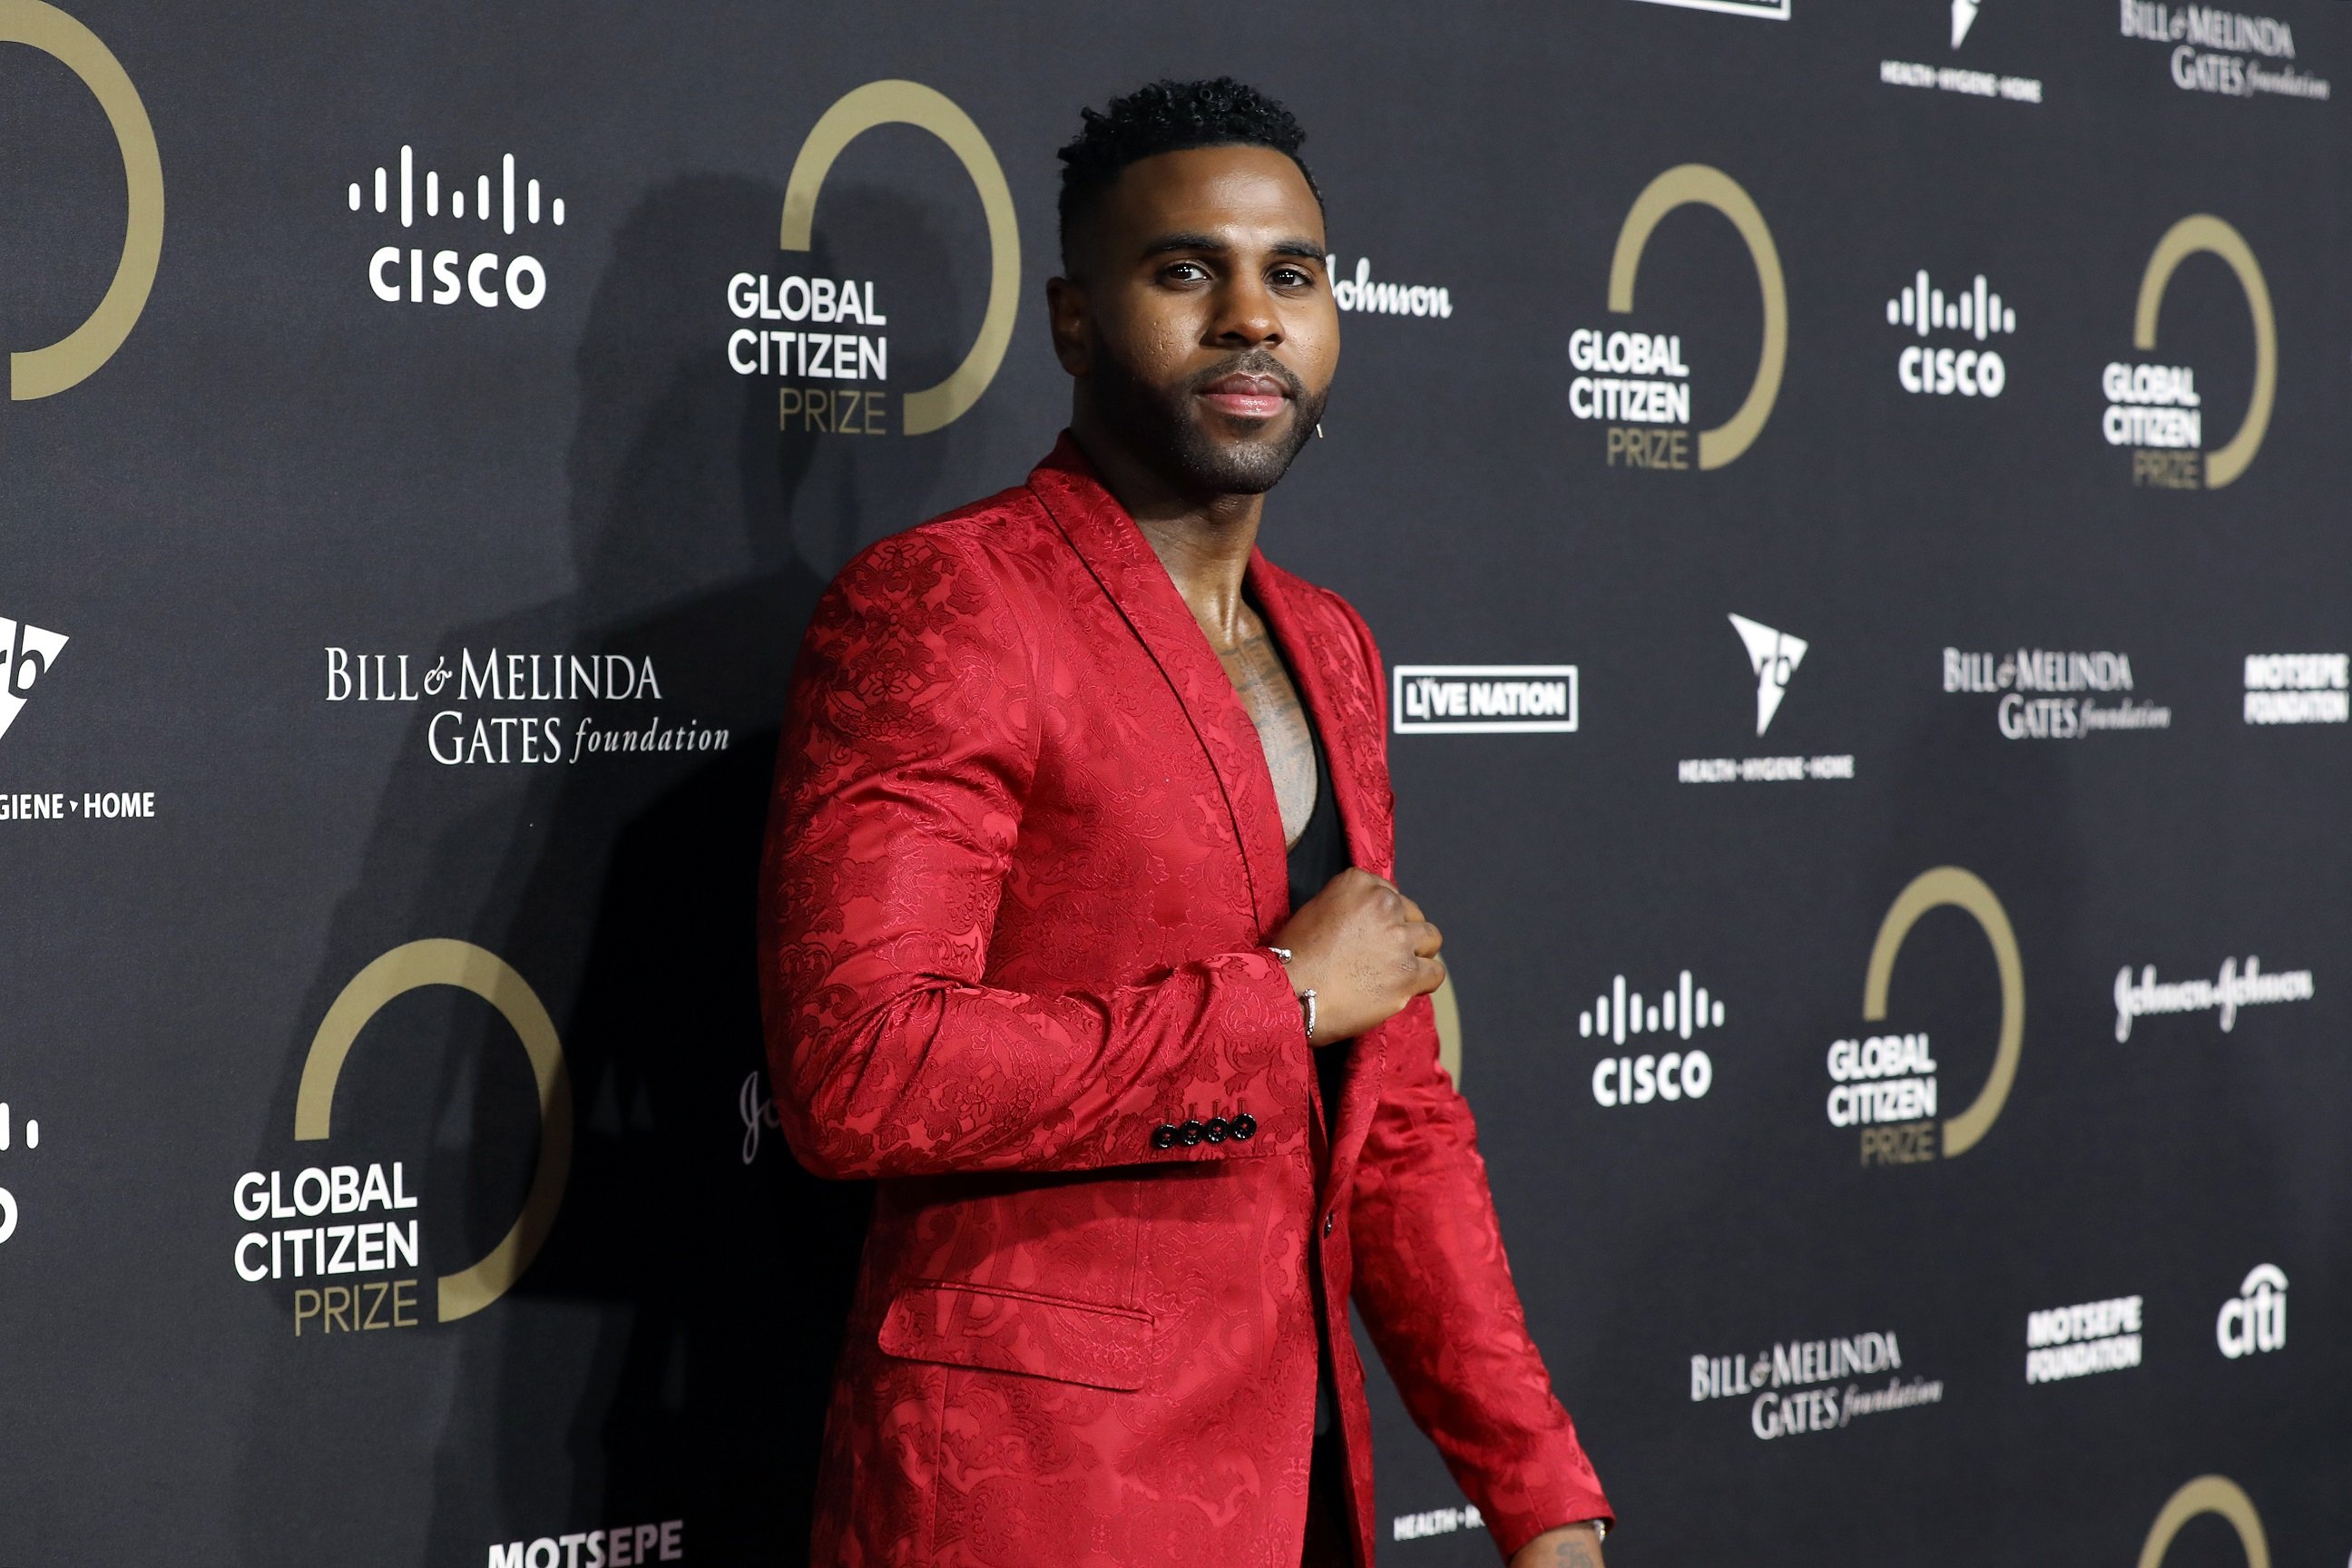 Jason Derulo wearing a red outfit